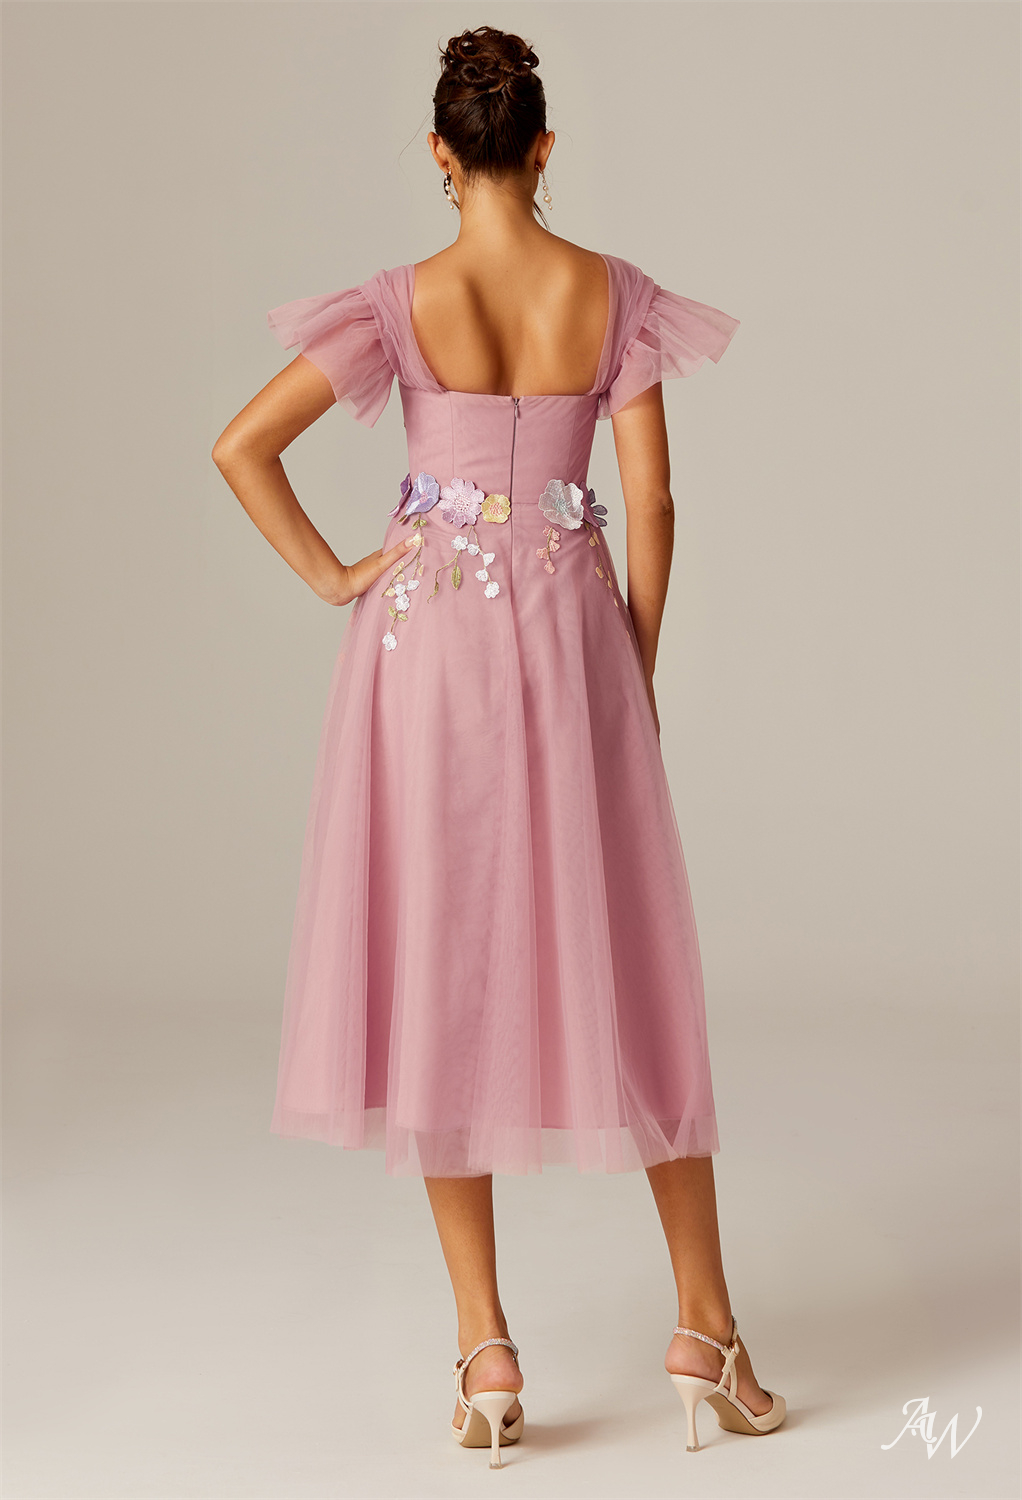 Formal Western Wear Dusty Rose Outfit #Outfit 1119 Dusty Rose